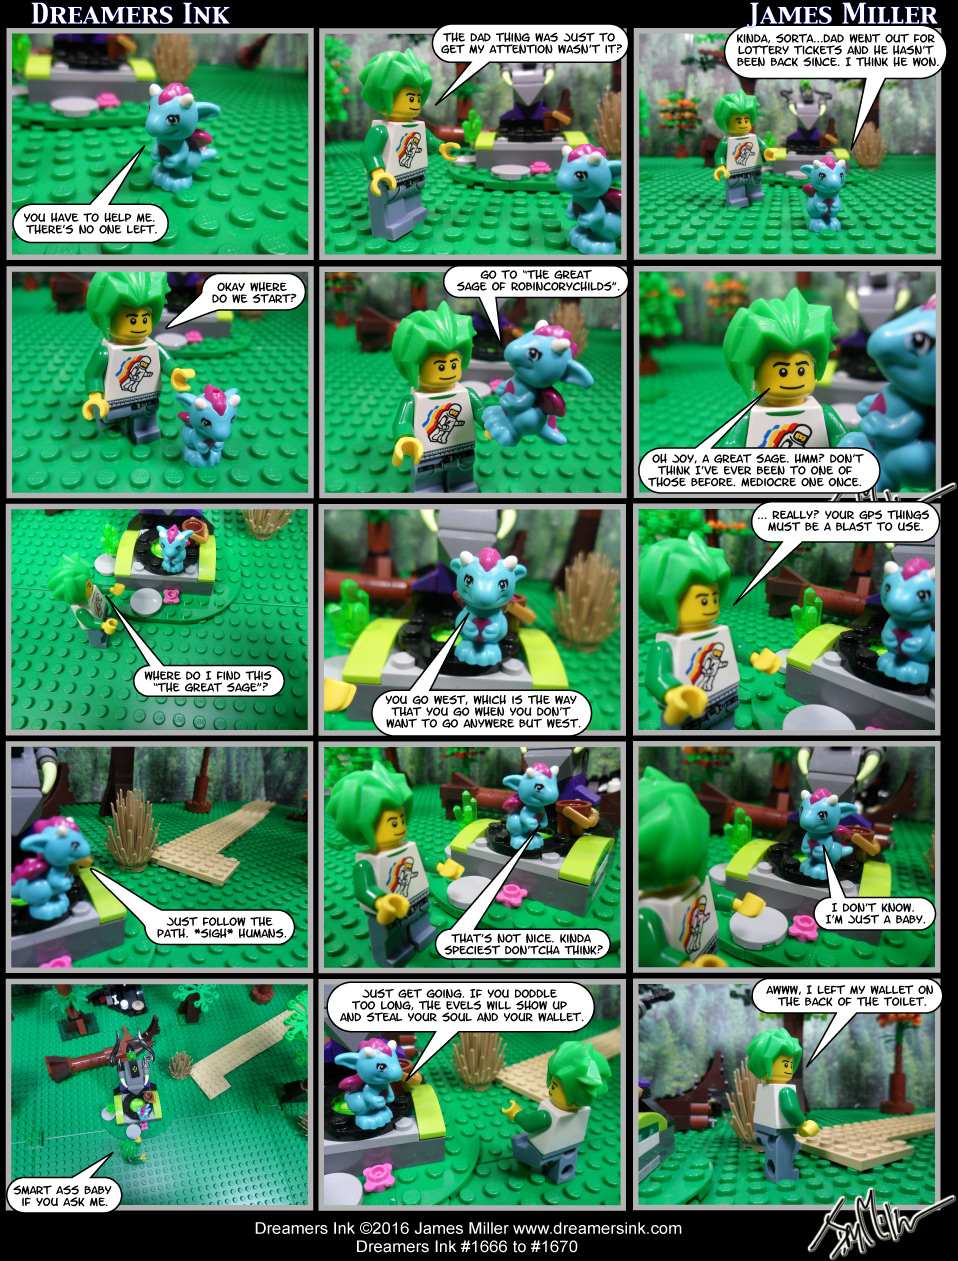 Strips #1666 to #1670